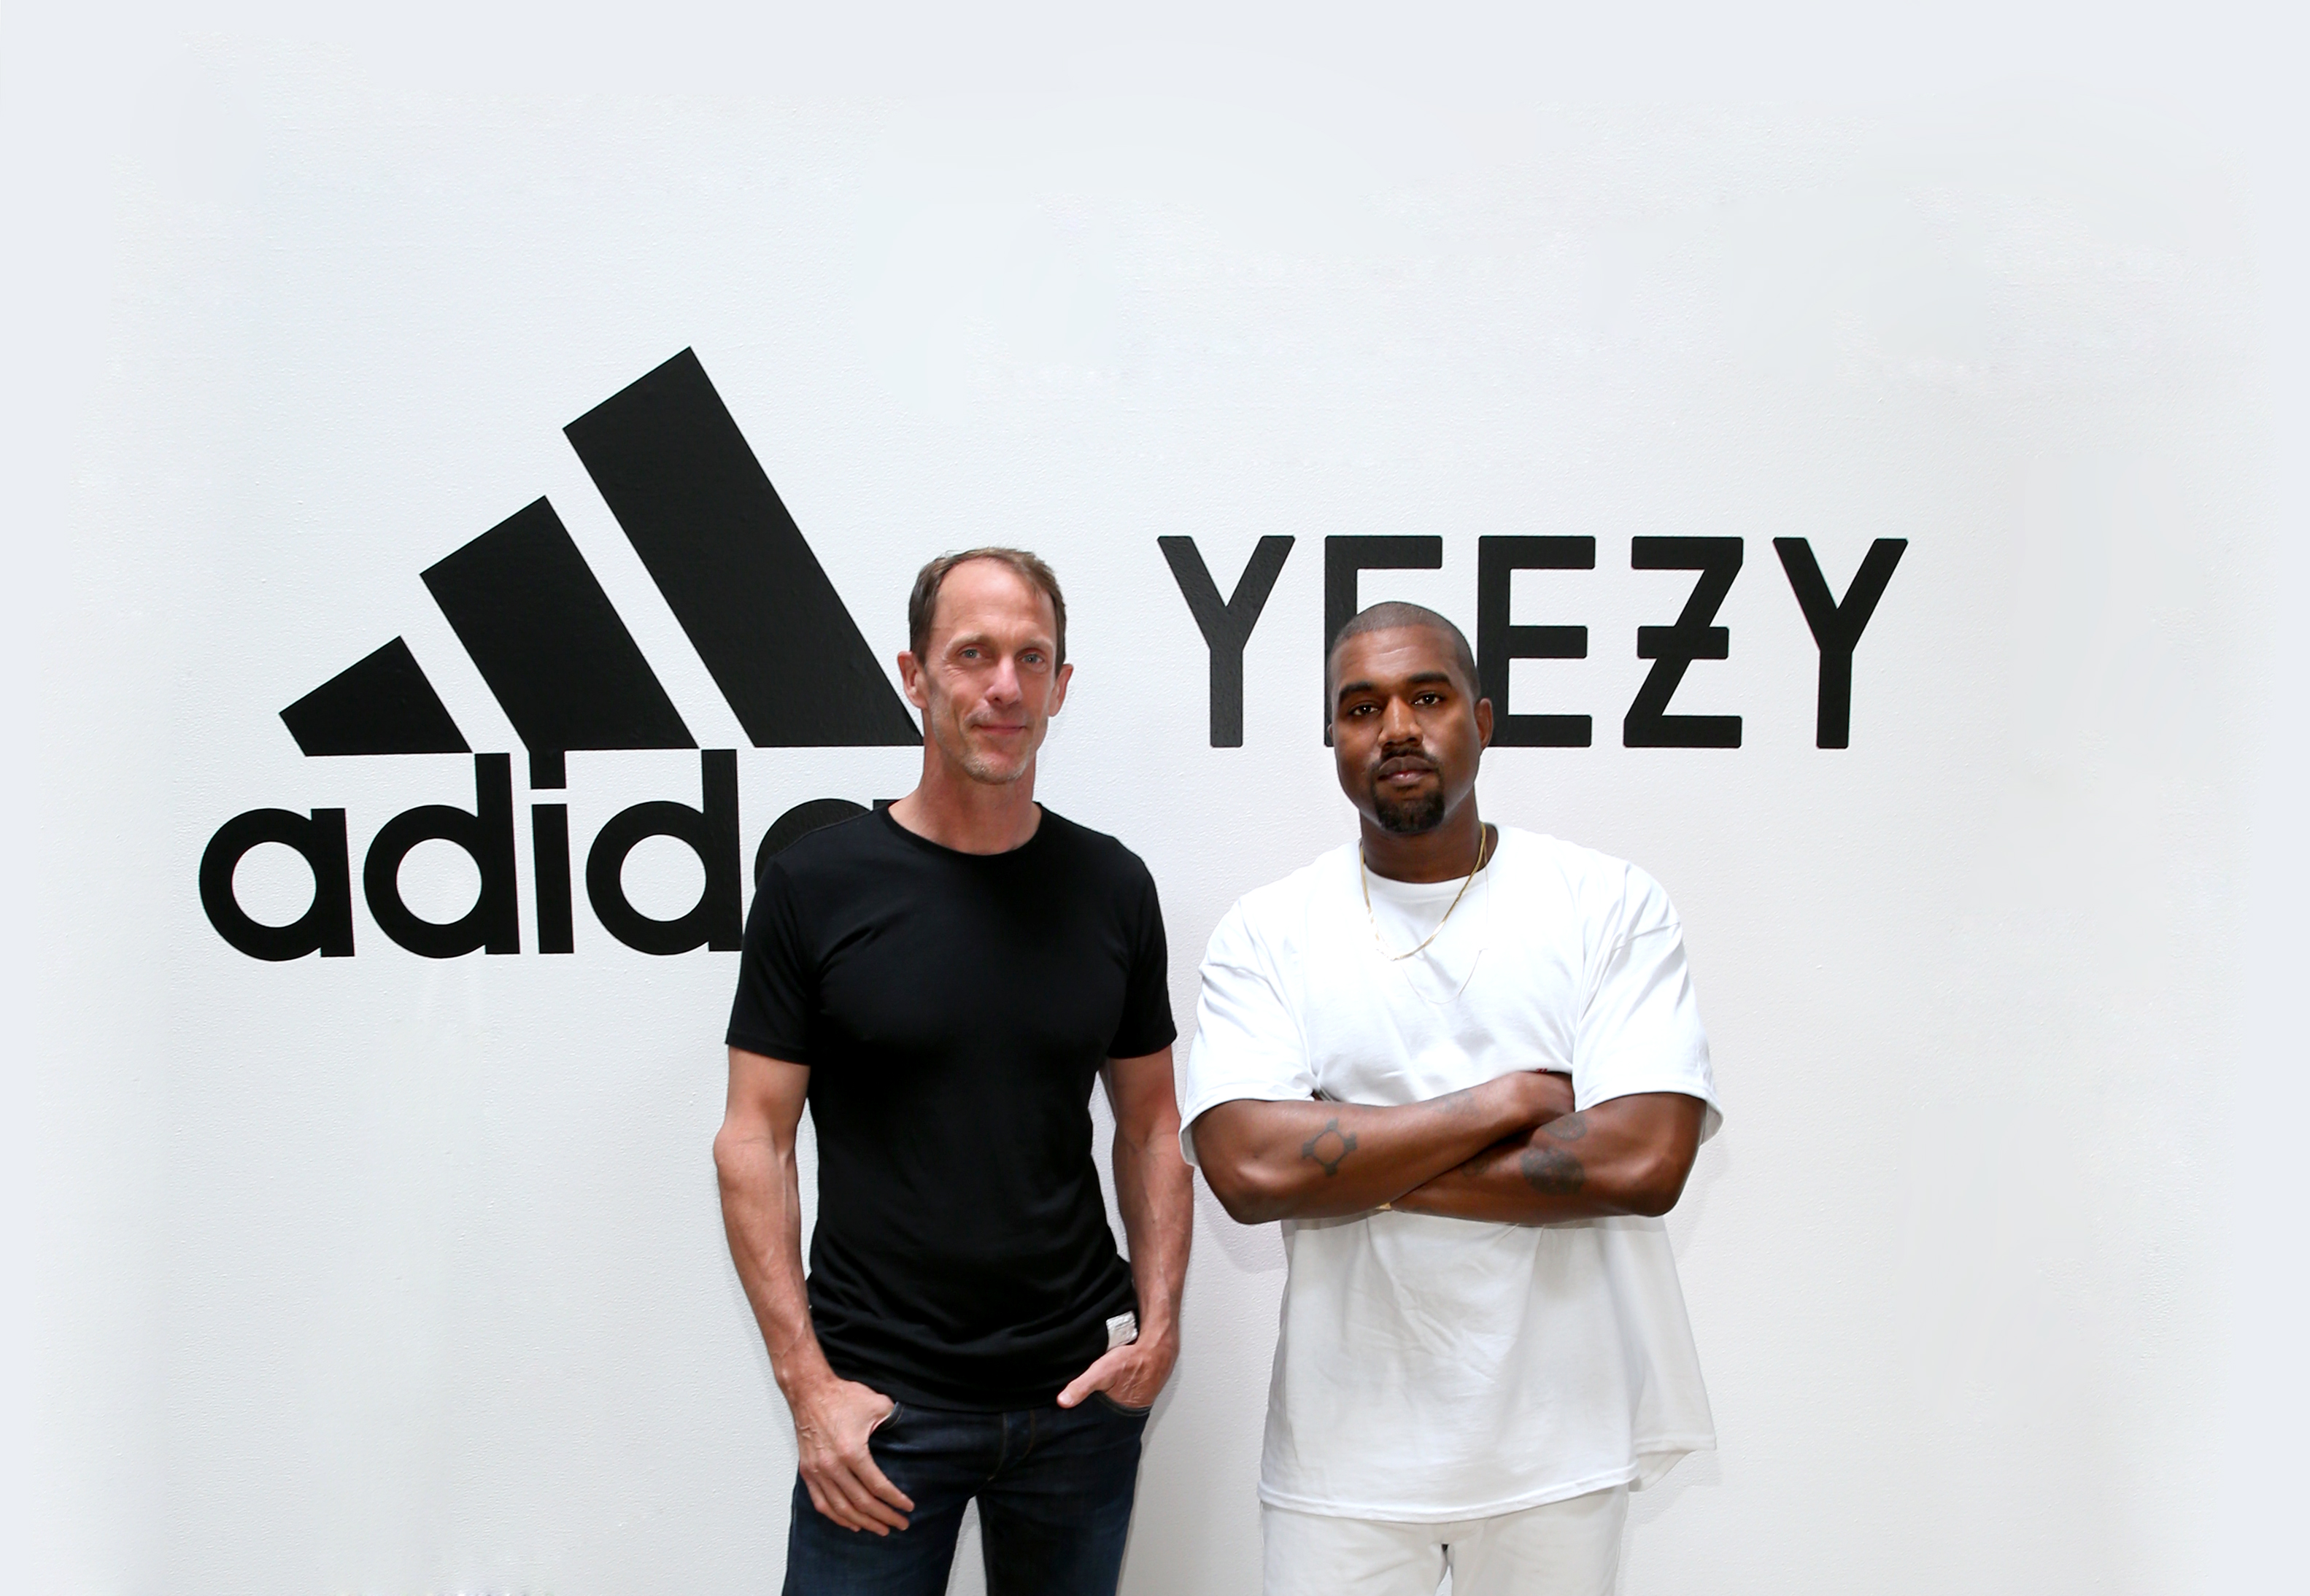 (L-R) adidas CMO Eric Liedtke and Kanye West at Milk Studios on June 28, 2016 in Hollywood, California. adidas and Kanye West announce the future of their partnership: adidas + KANYE WEST